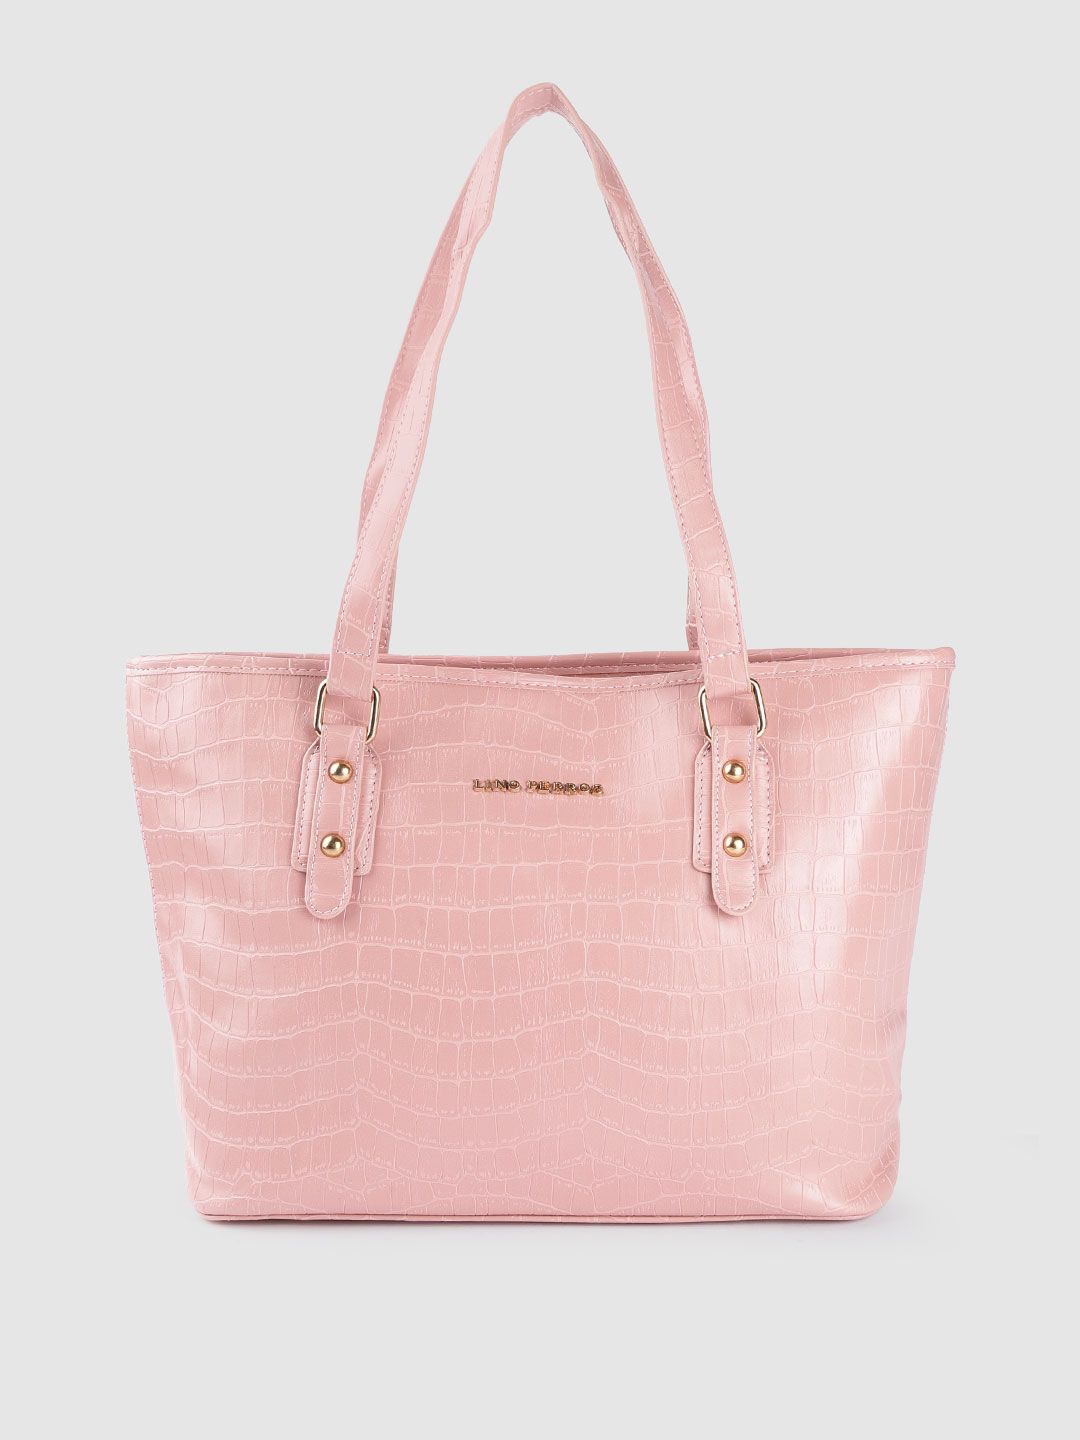 Lino Perros Women Peach-Coloured Croc-Textured Structured Shoulder Bag Price in India